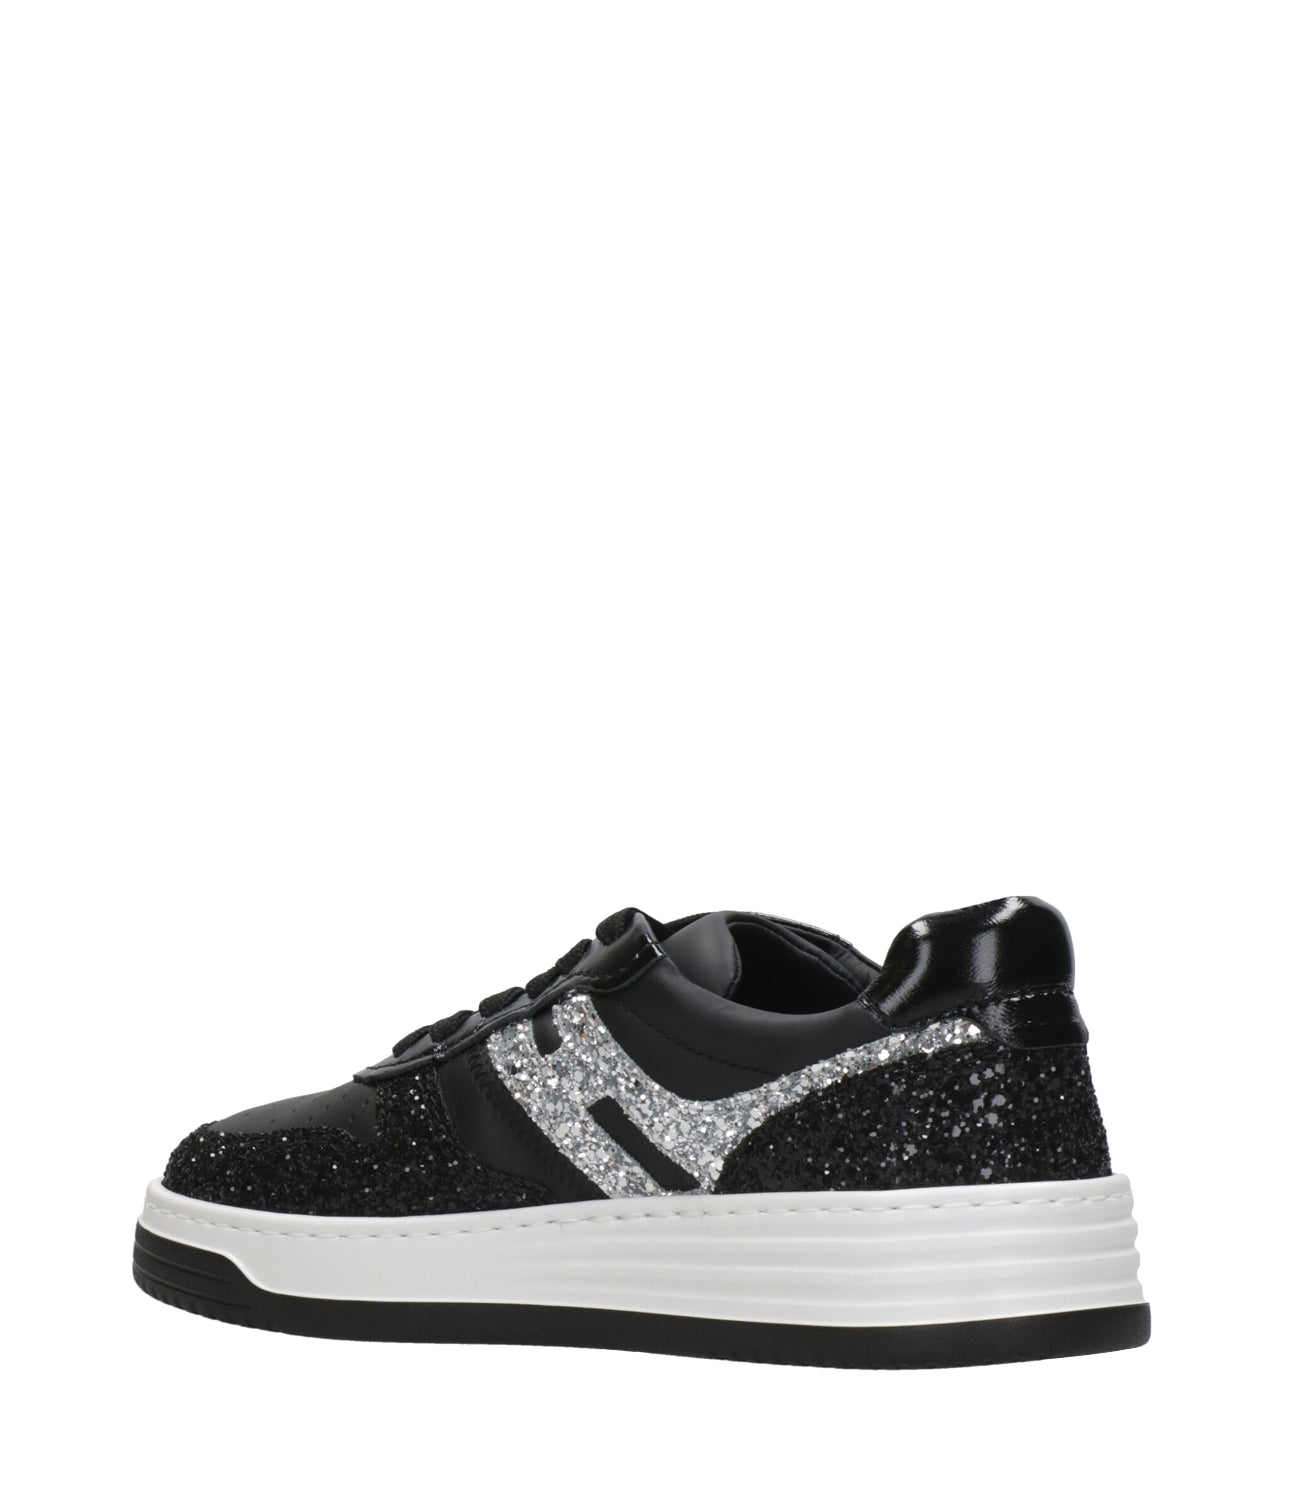 Hogan | Sneakers H630 Lace-up Black and Silver